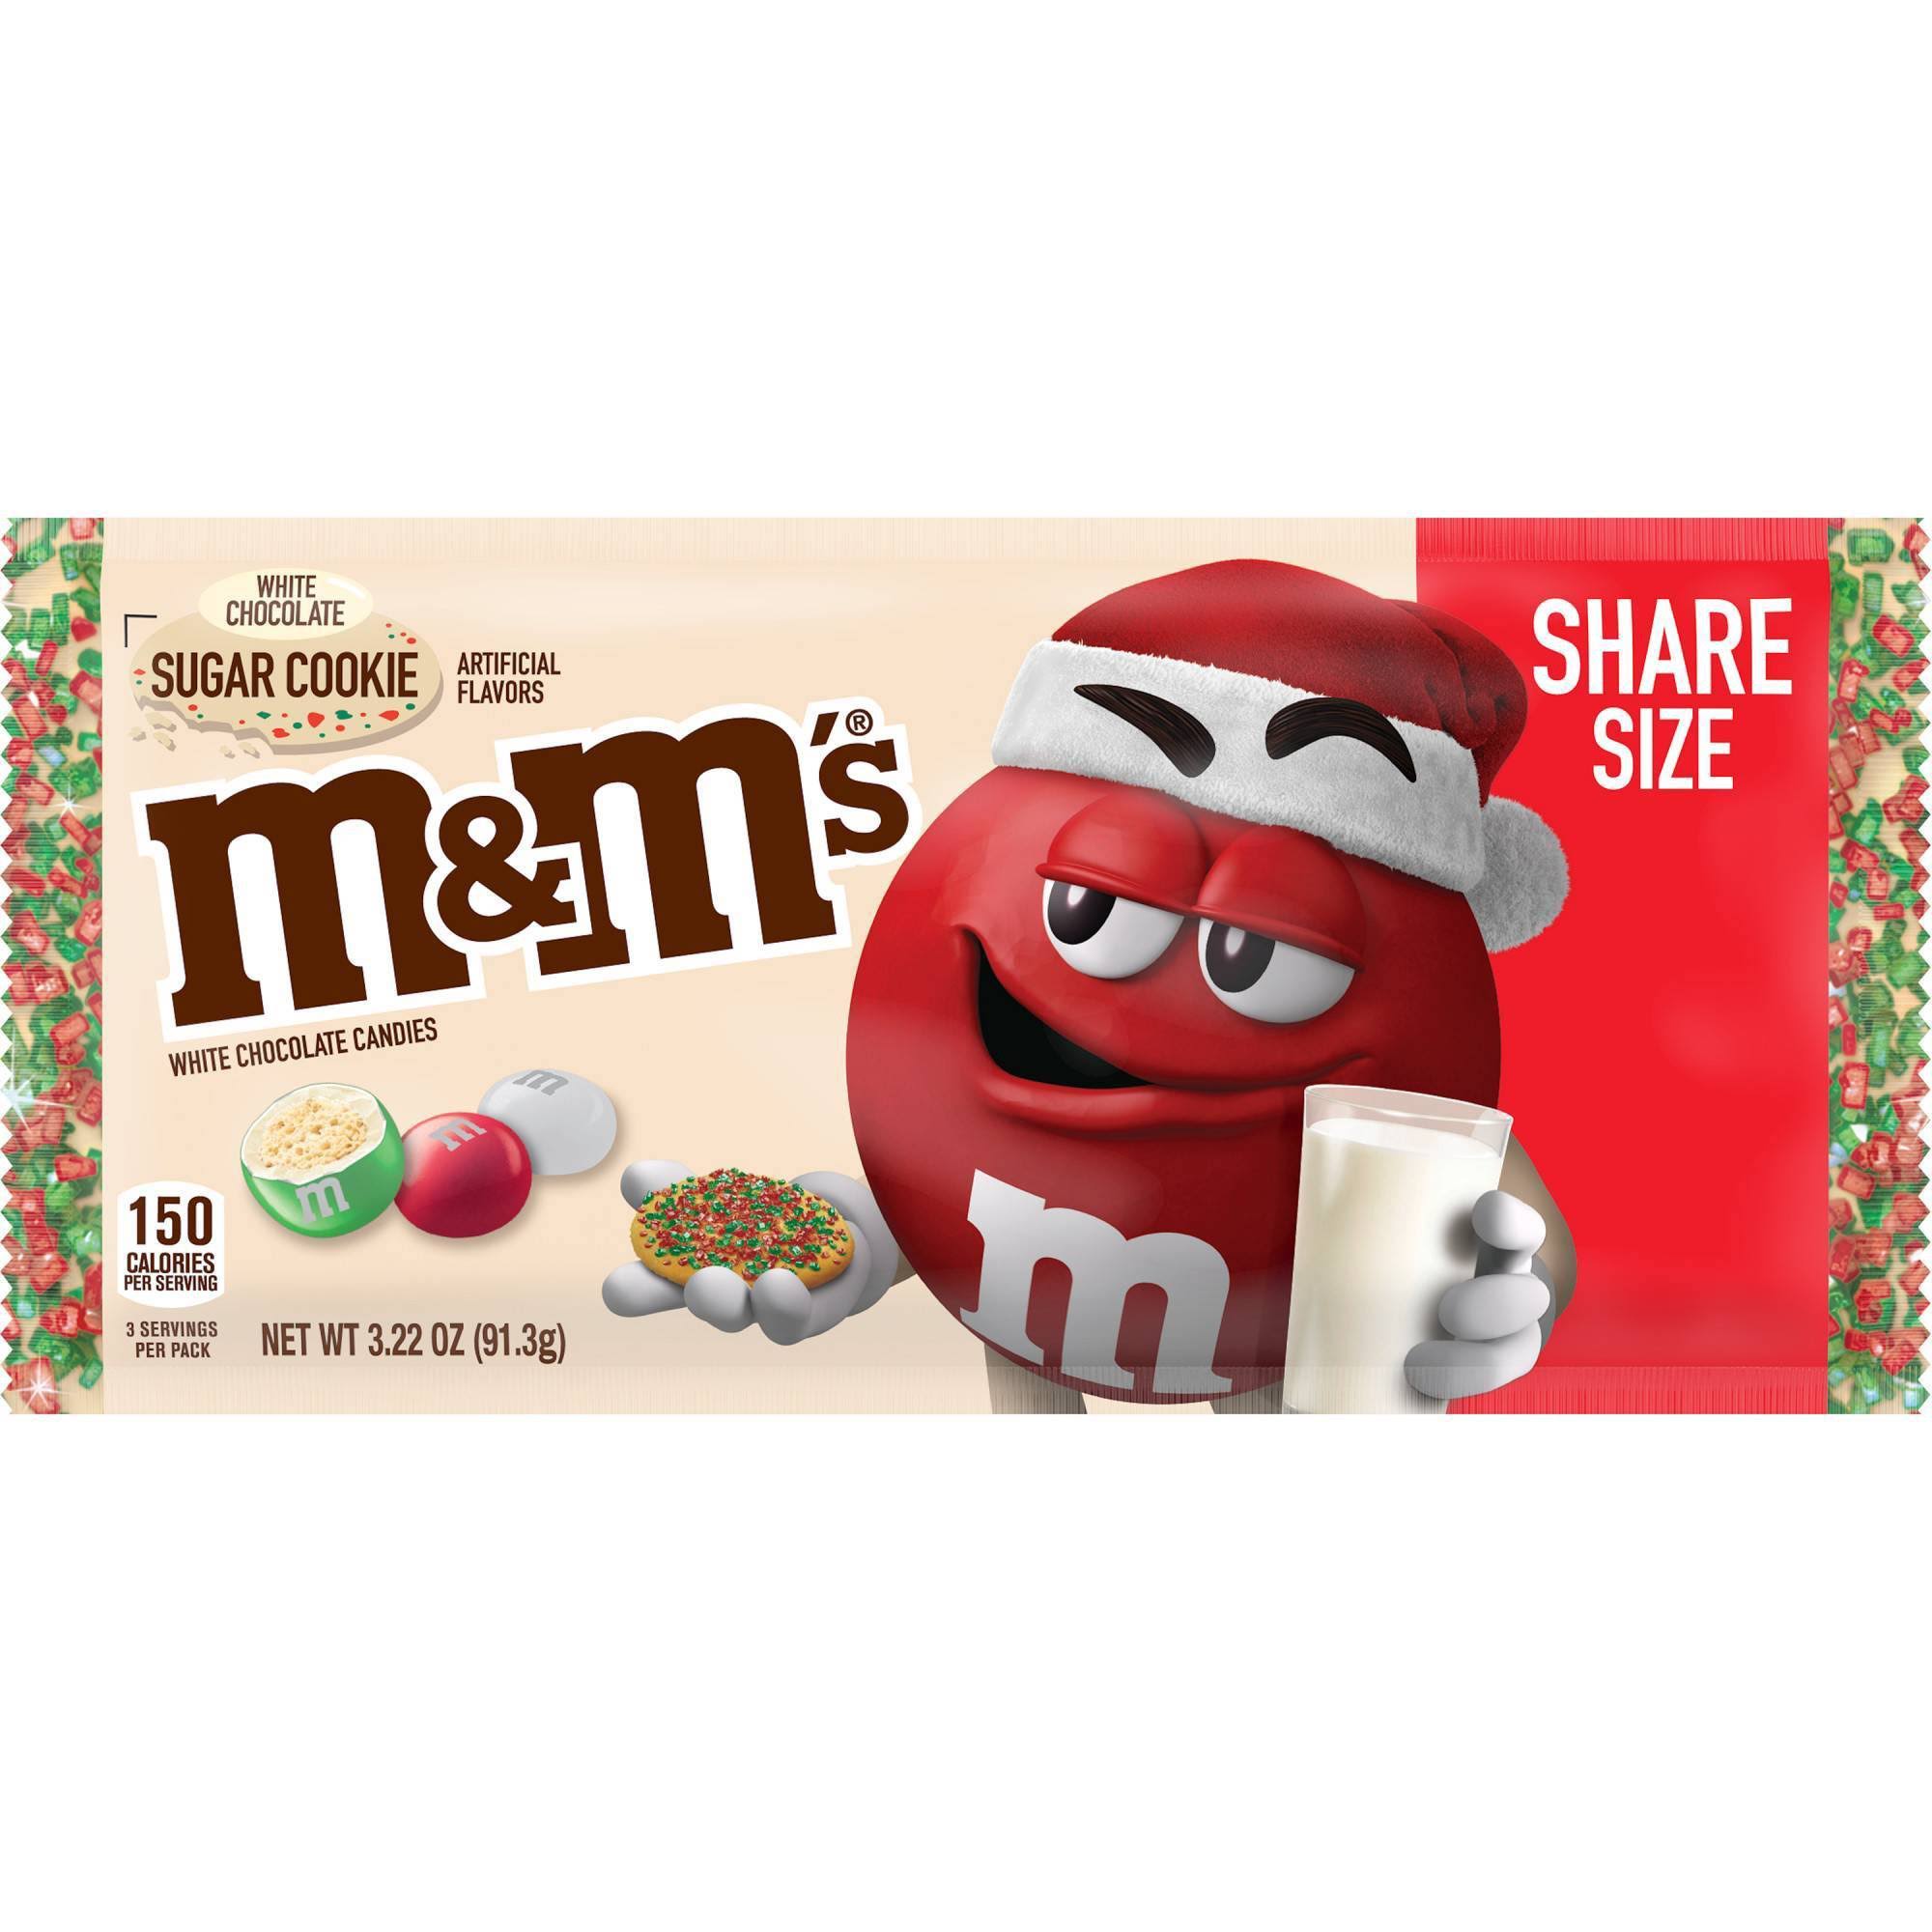 Xmas M&m Sugar Cookies Share Size - Sugar Cookie M&ms These M&m's